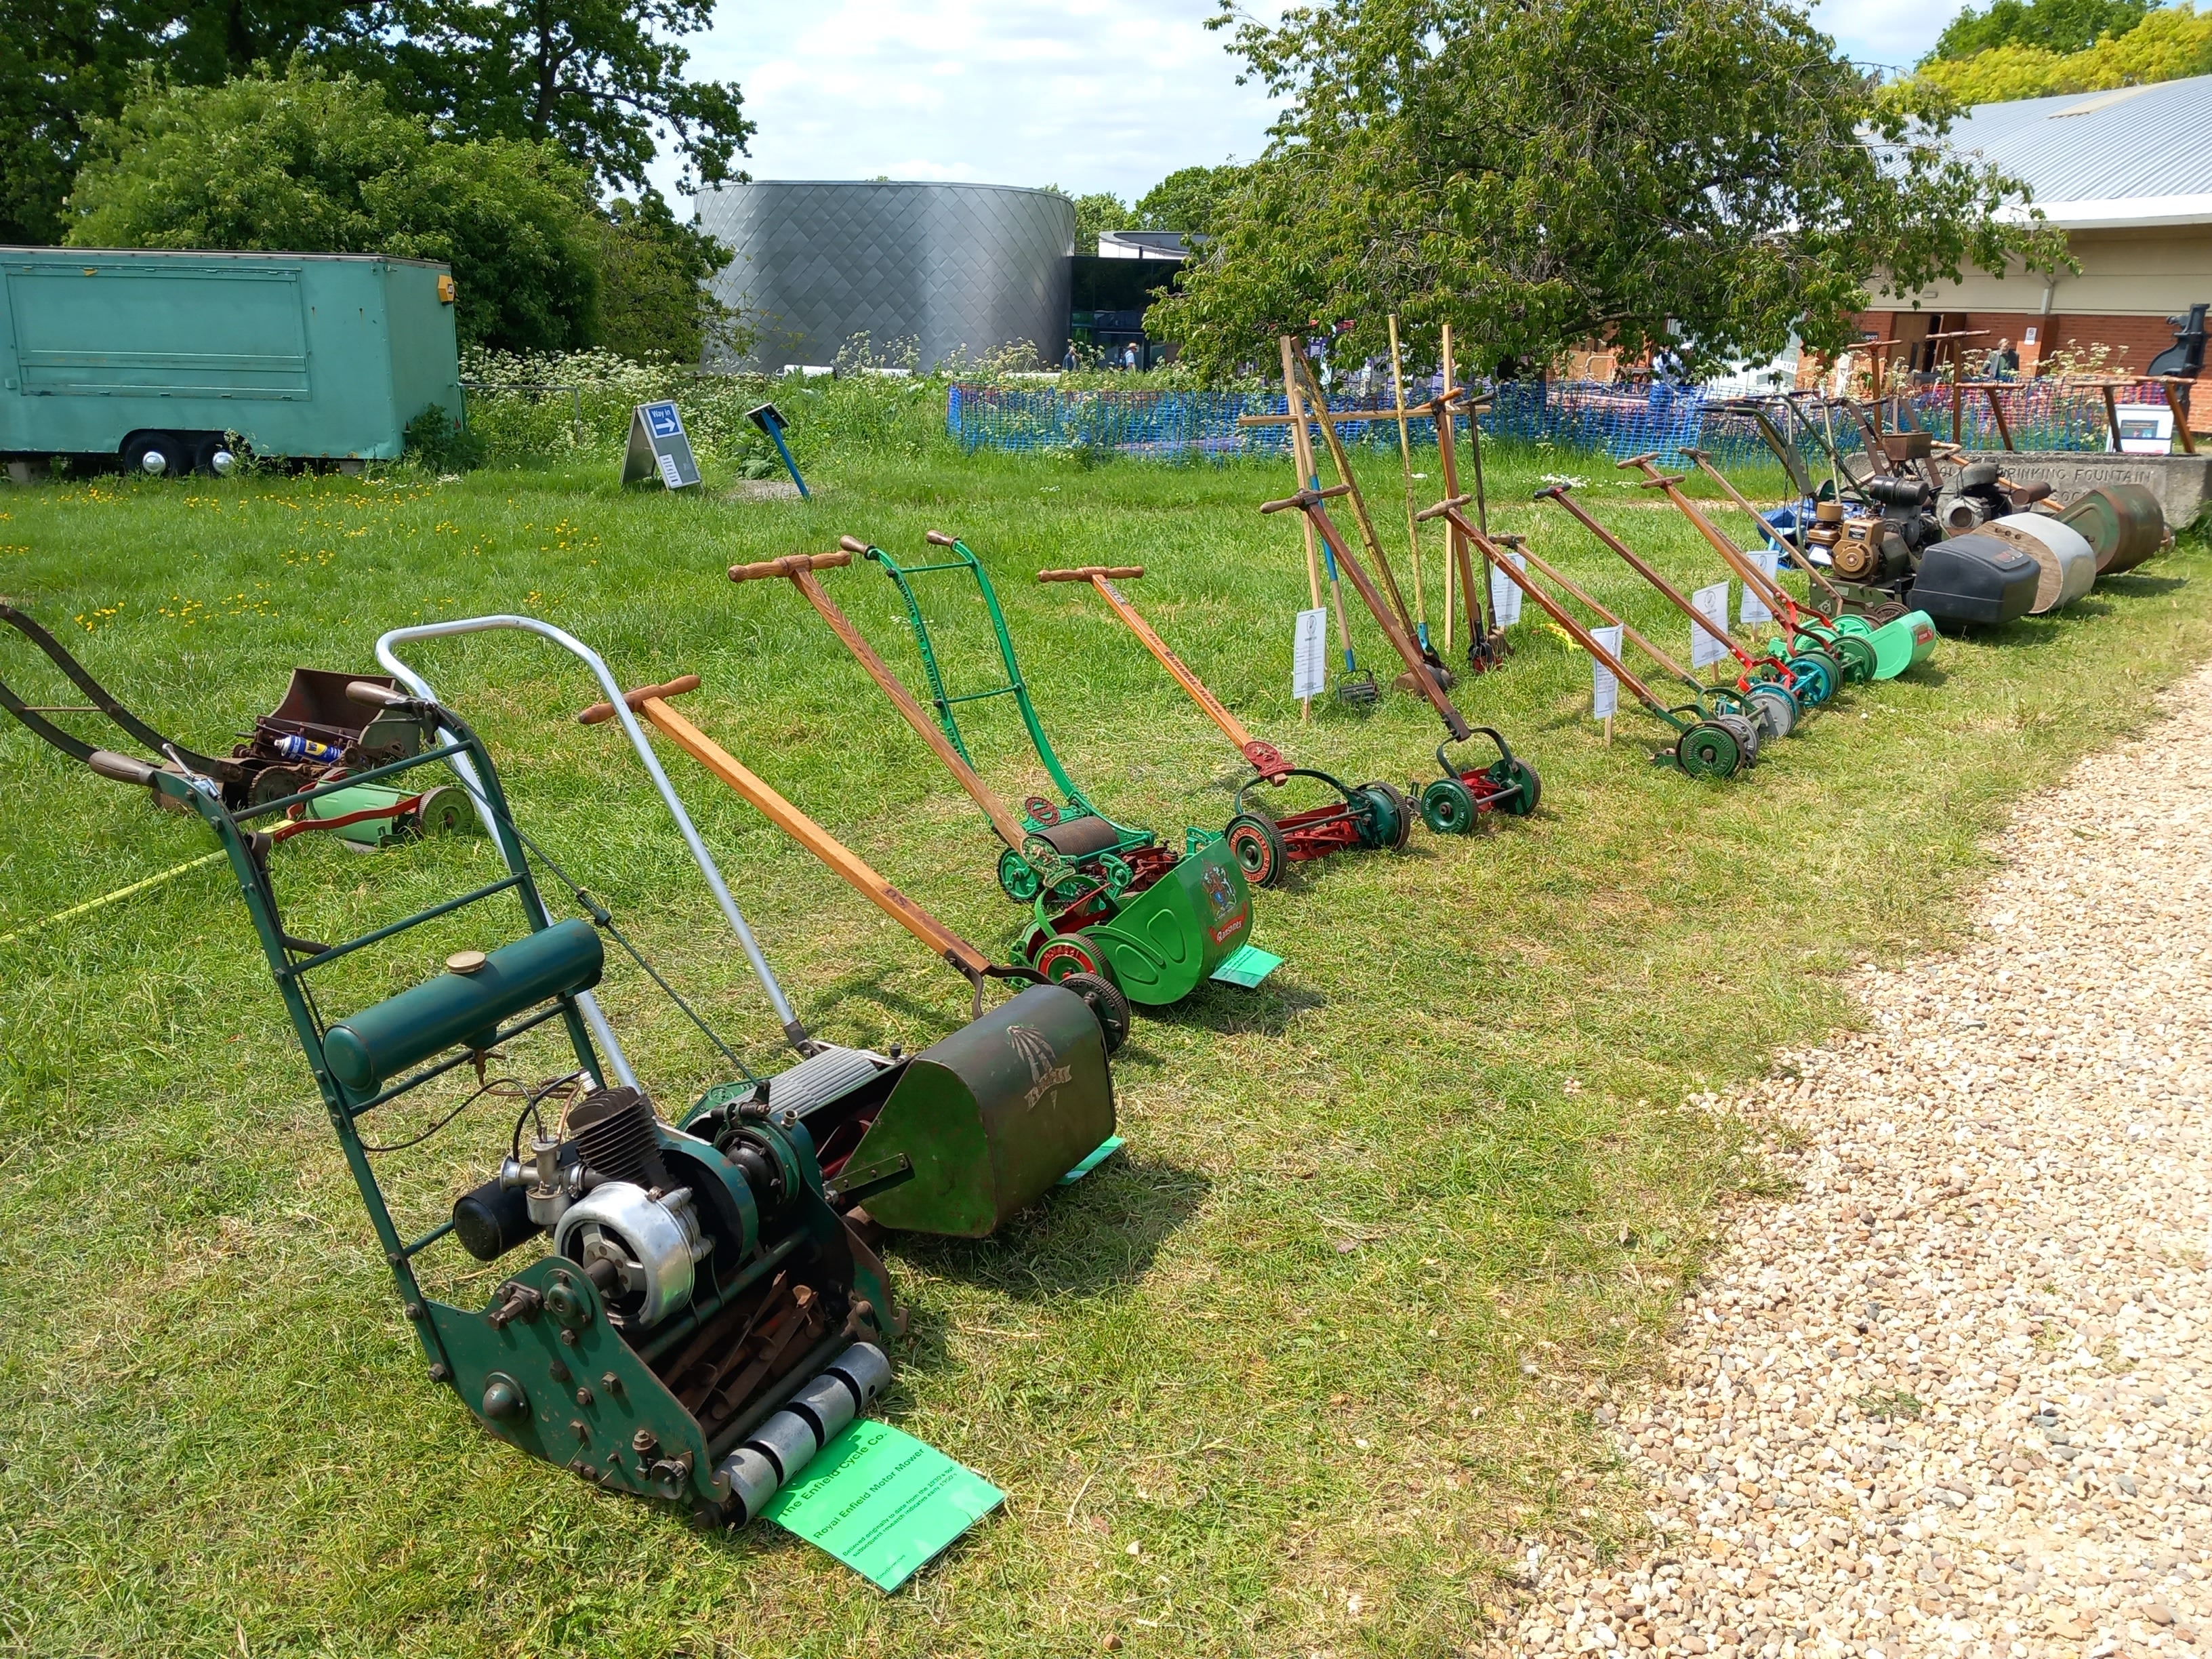 Mowers near the Bandstand on the Sunday